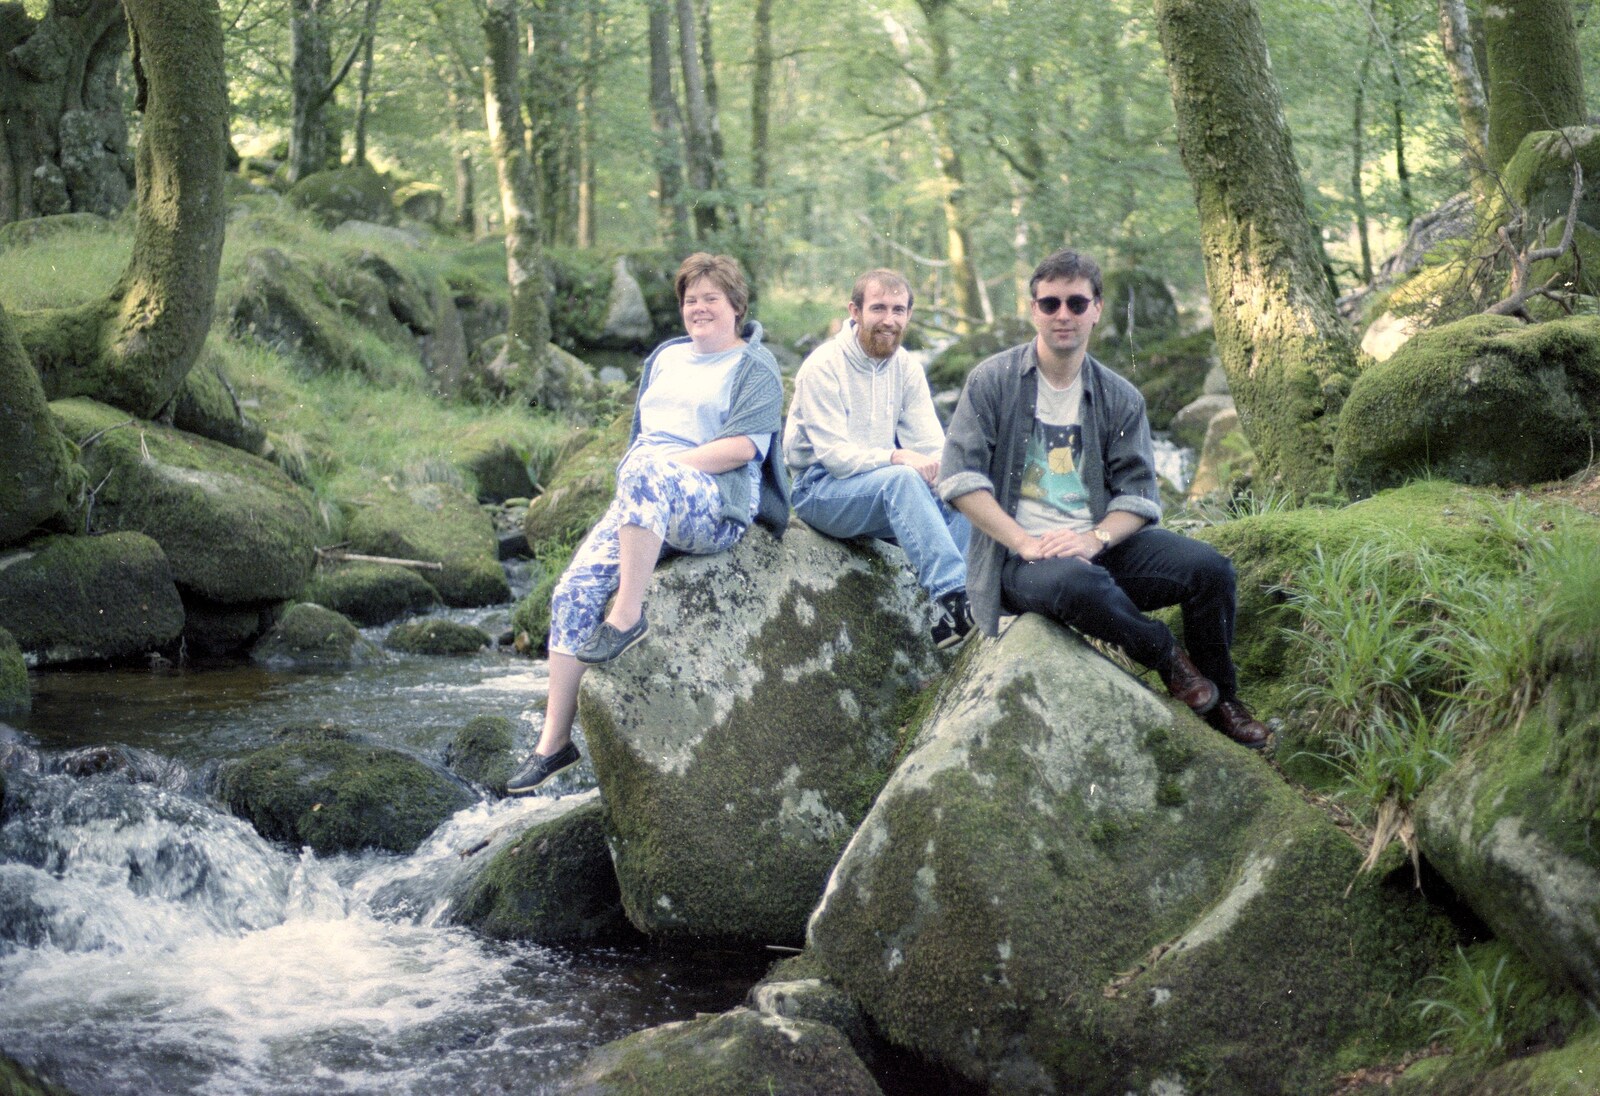 We find more rocks to sit on  from A Trip to Mutton Cove, Plymouth, Devon - 15th May 1993